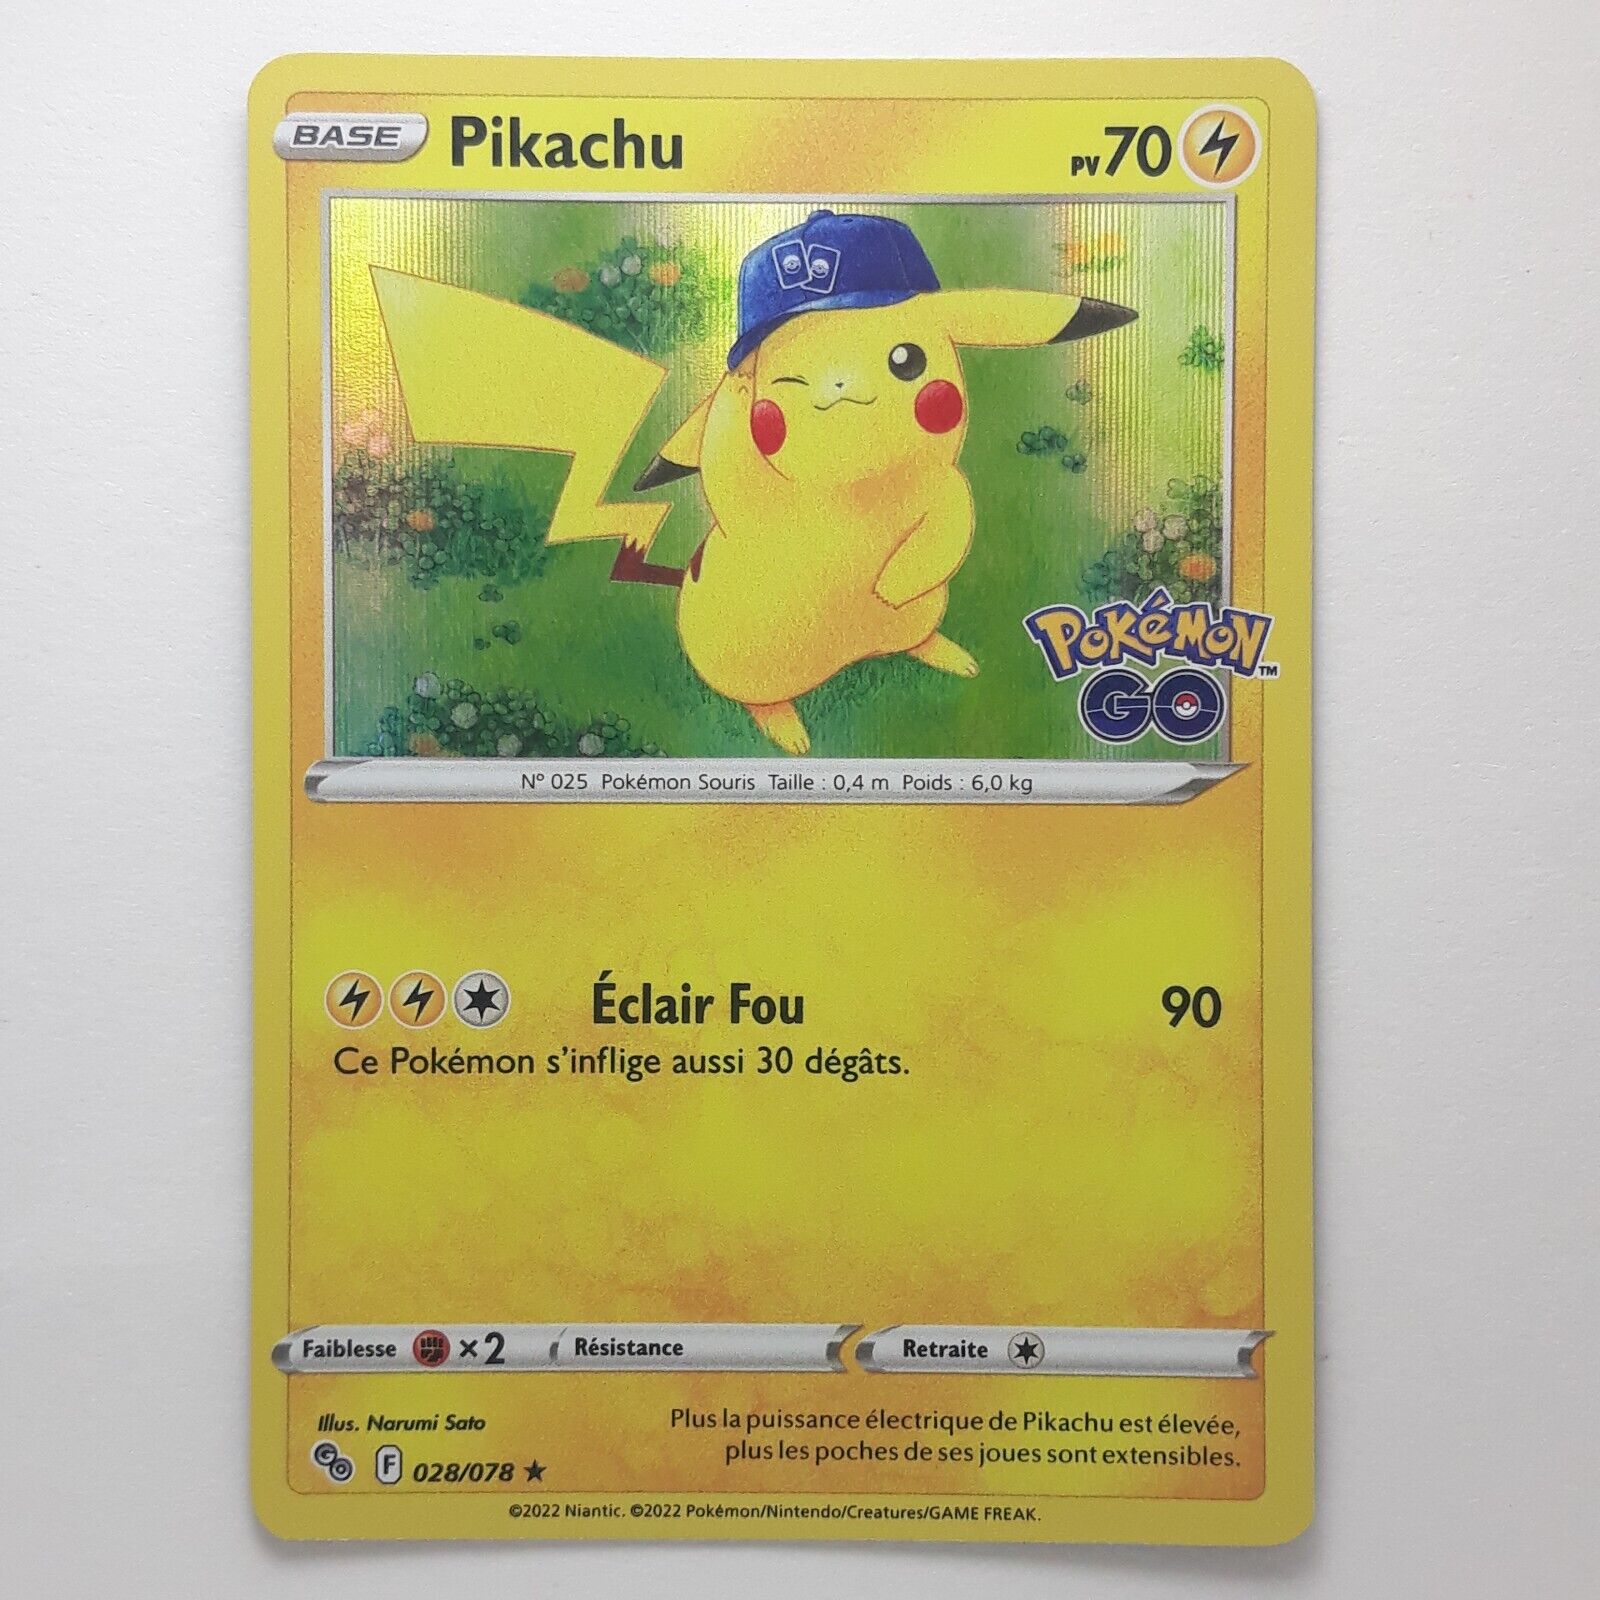 PIKACHU 028/078 POKEMON GO HOLOGRAPHIC CARD NEW + TOTOPLOADER B